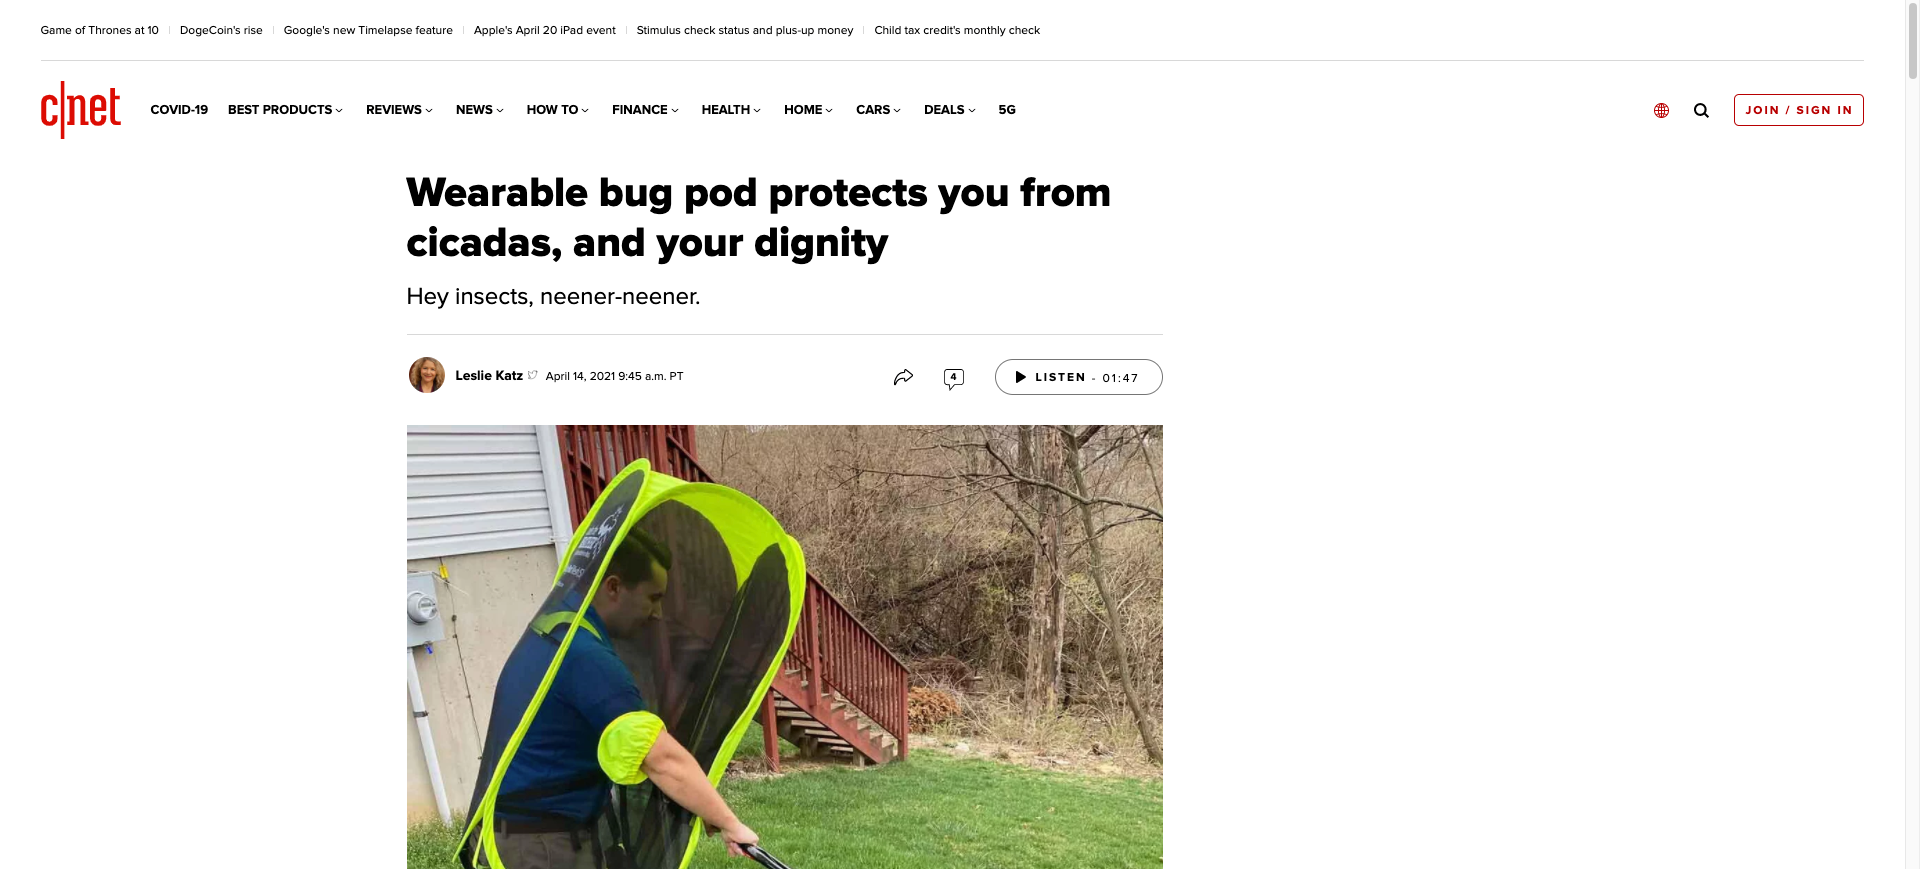 CNET: Wearable bug pod protects you from cicadas, and your dignity